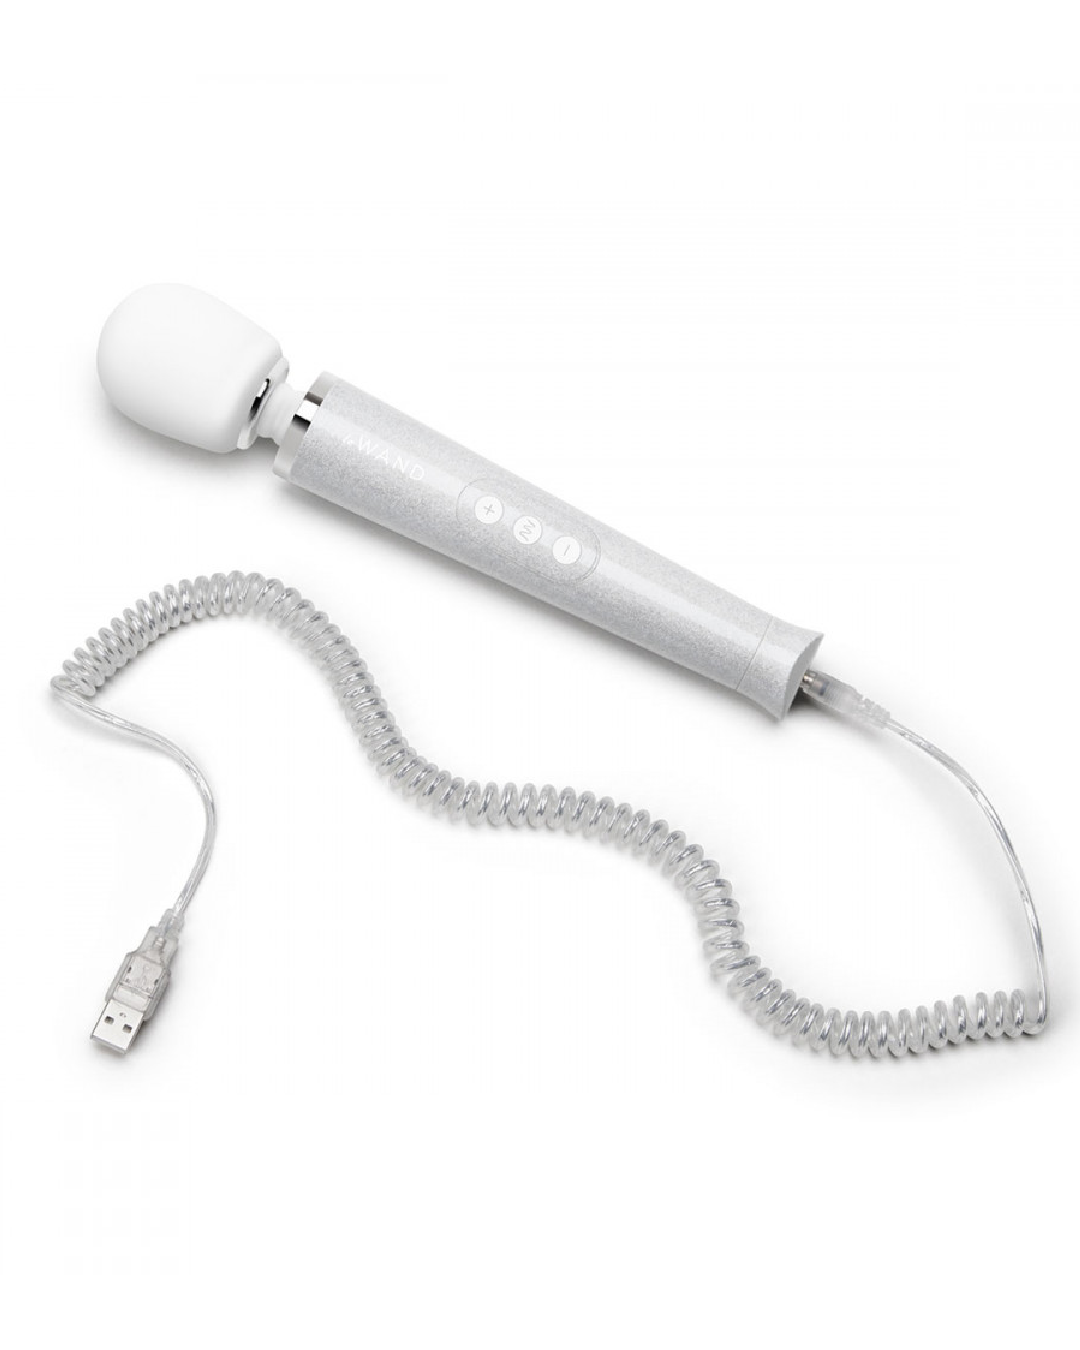 All That Glimmers Wand Vibrator Set - White